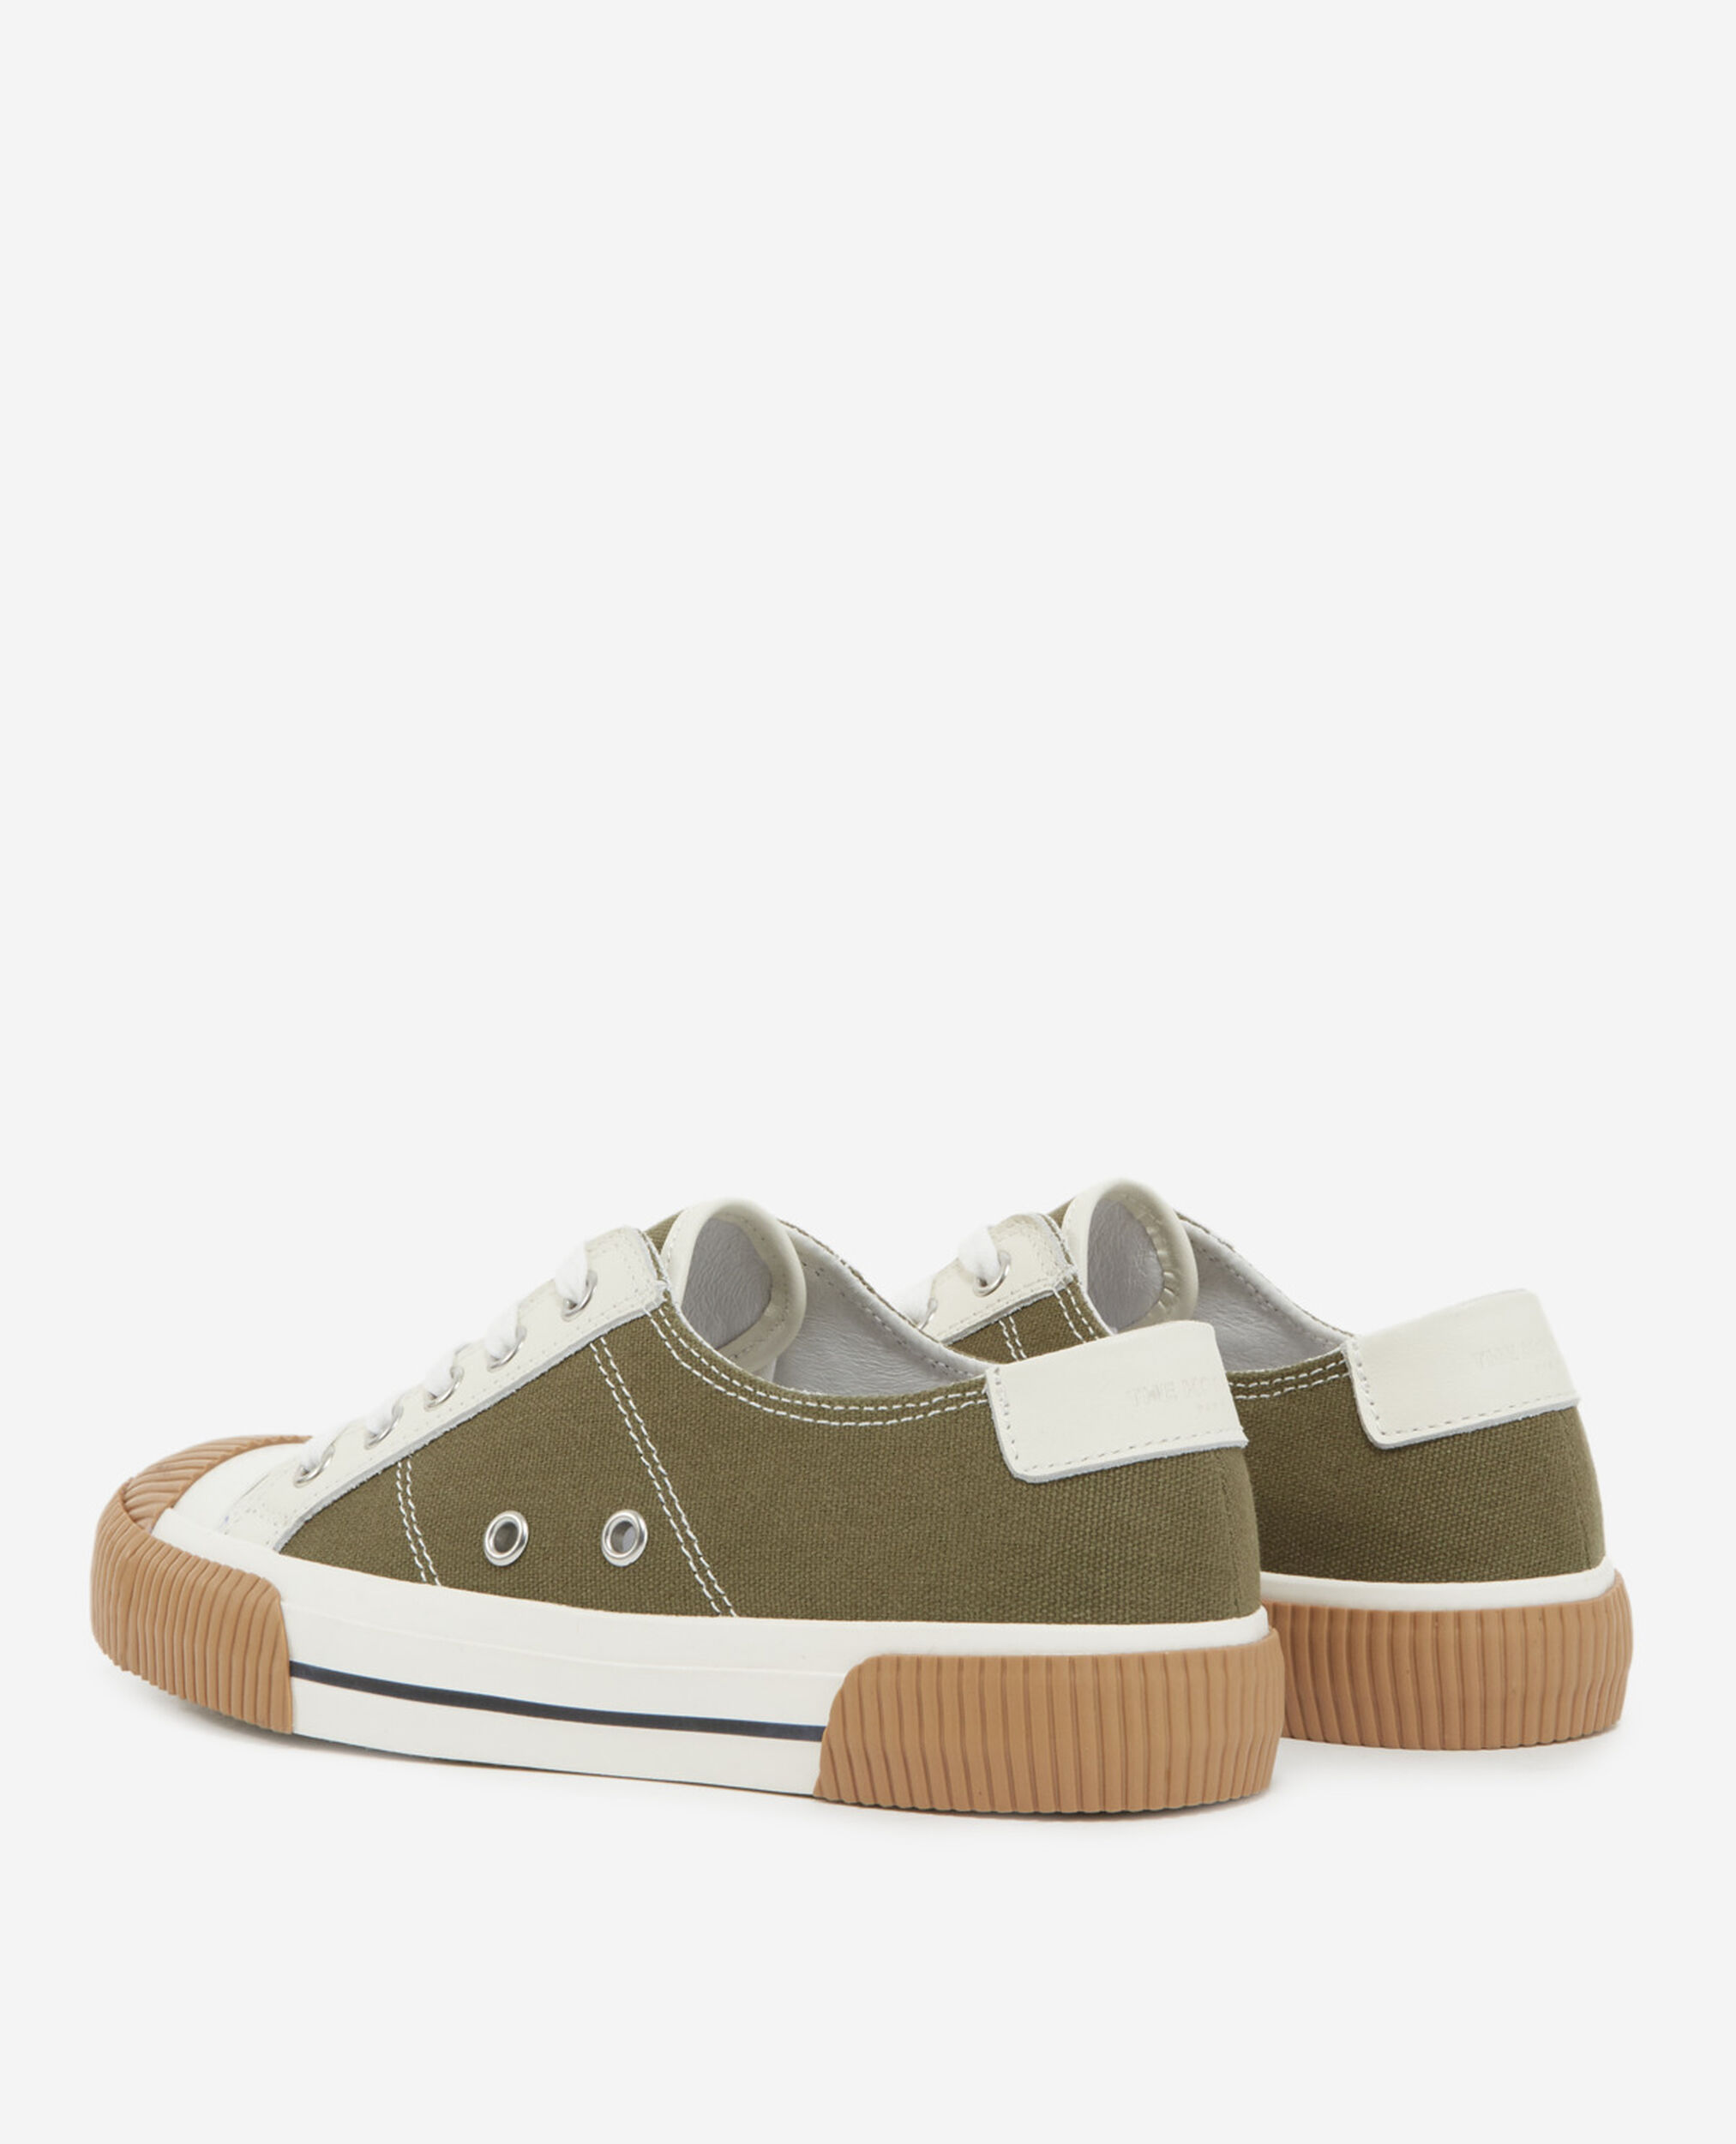 Khaki low-top canvas sneakers with details, KAKI, hi-res image number null